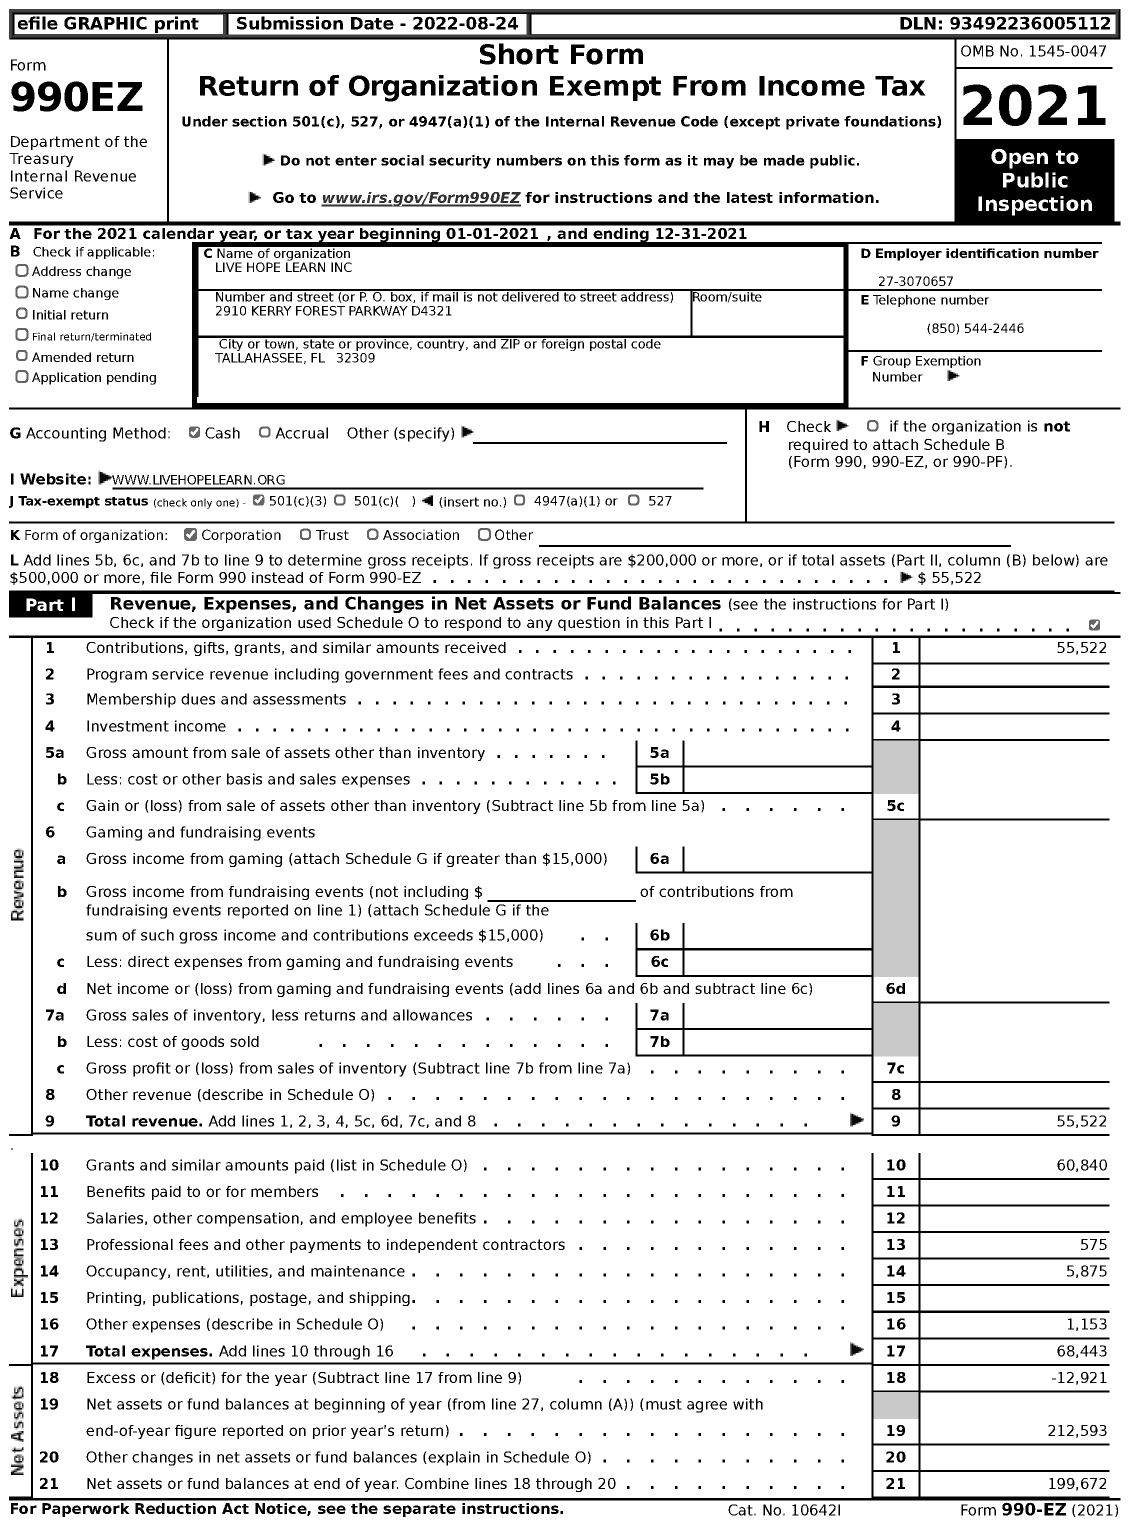 Image of first page of 2021 Form 990EZ for Live Hope Learn